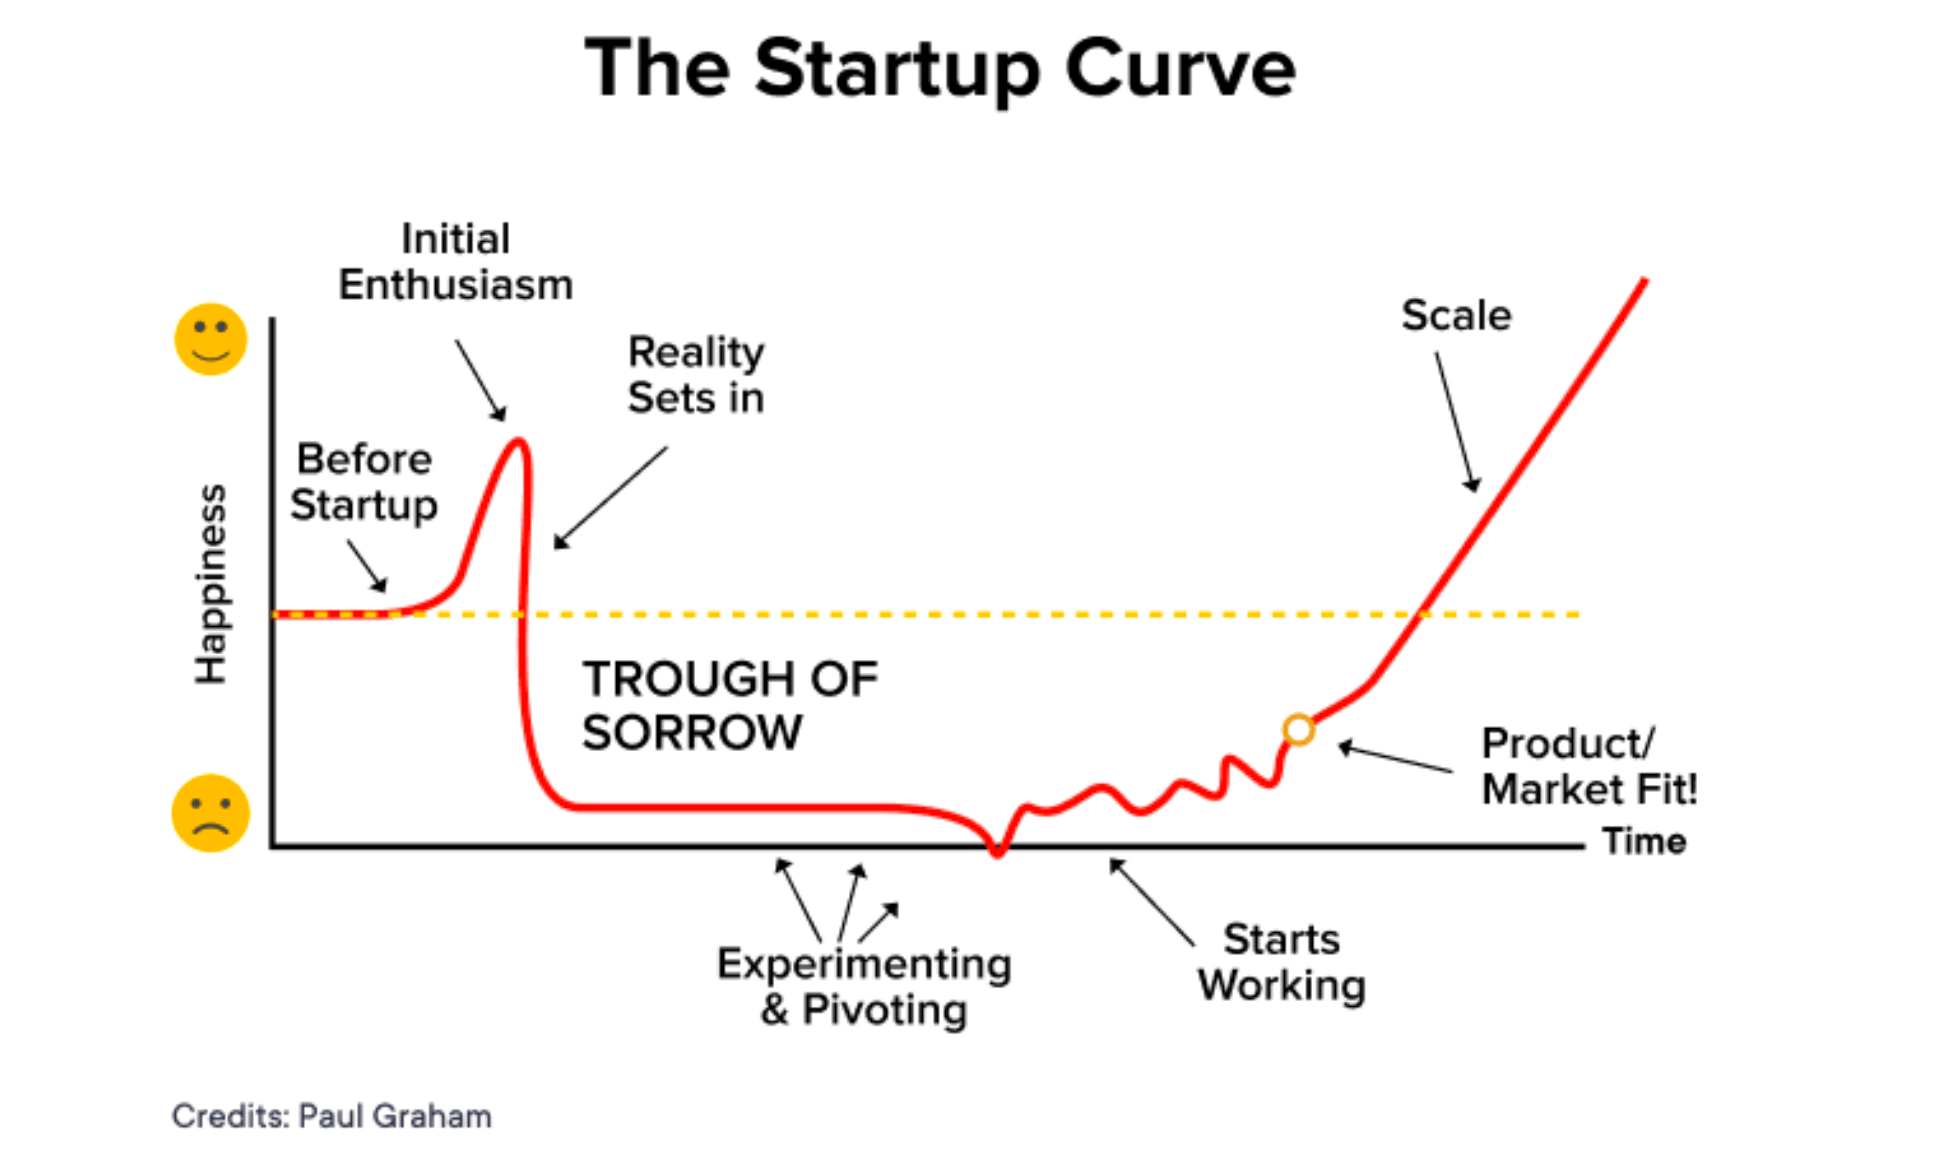 The Startup Curve by Paul Graham